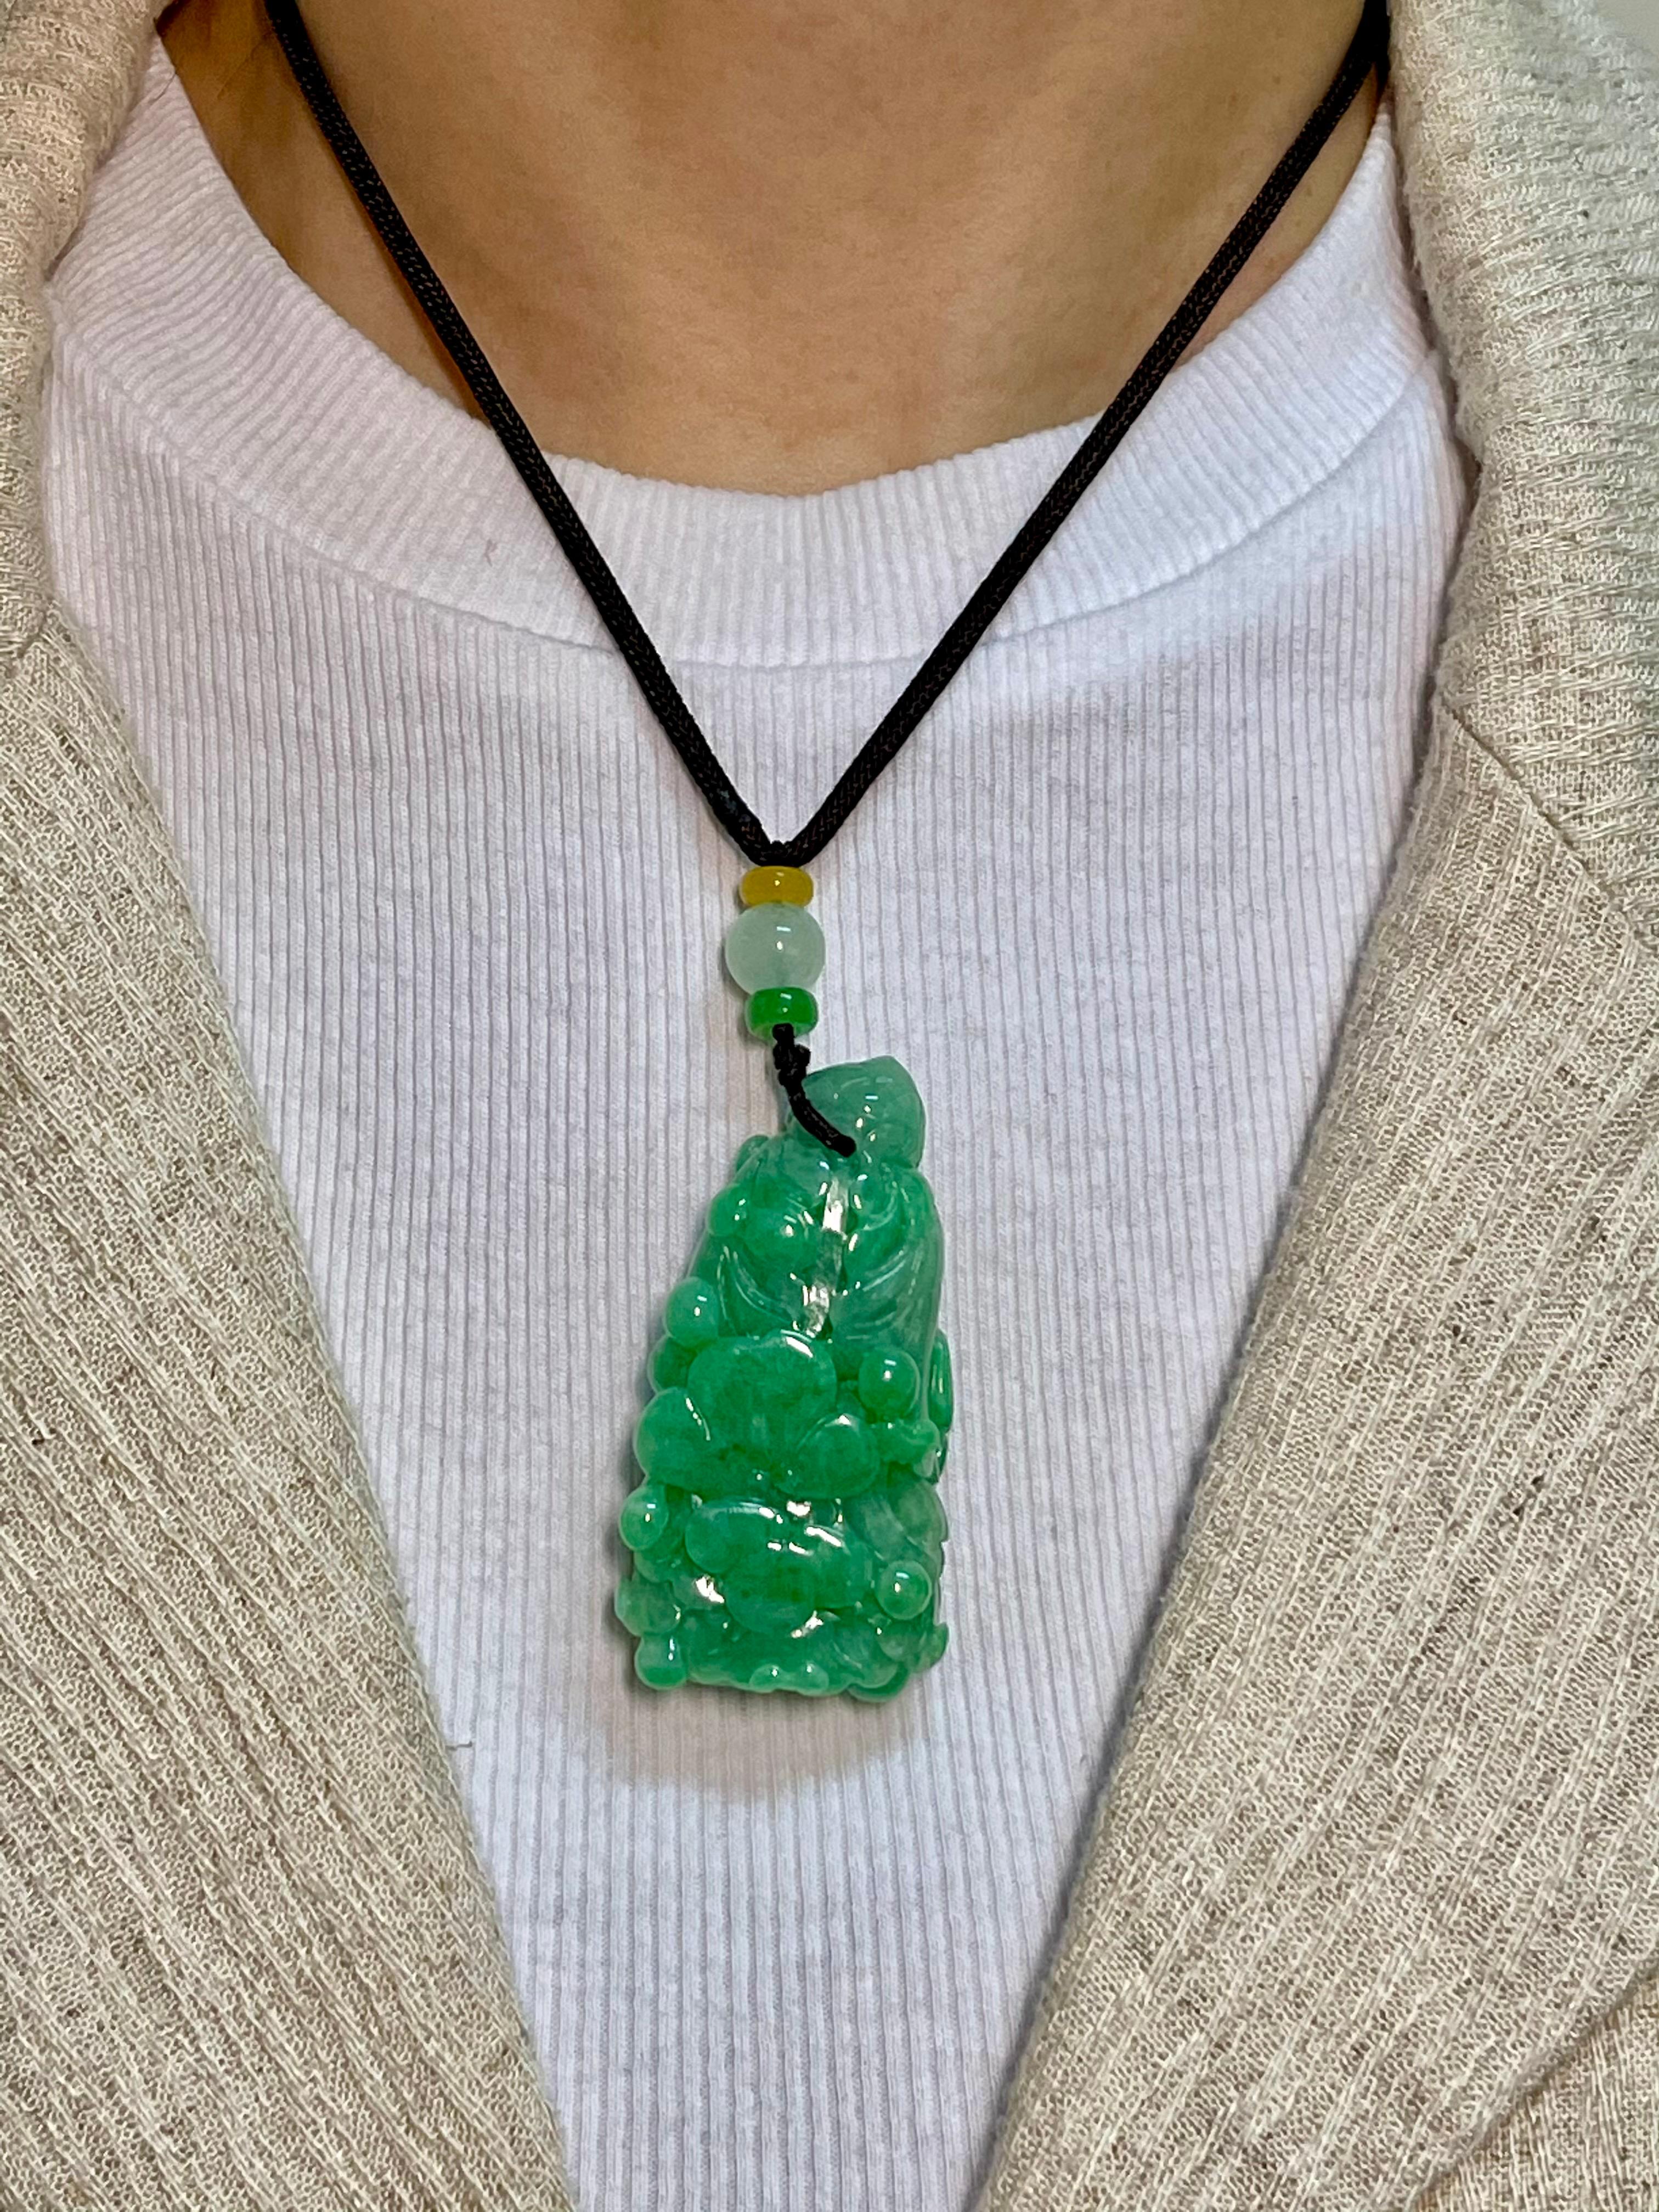 Please check out the HD video. This is certified natural jadeite jade by two labs. The jade flower is paired with some color beads for contrast. Flower carvings symbolizes enlightenment and open mindedness. This pendant is substantial at almost